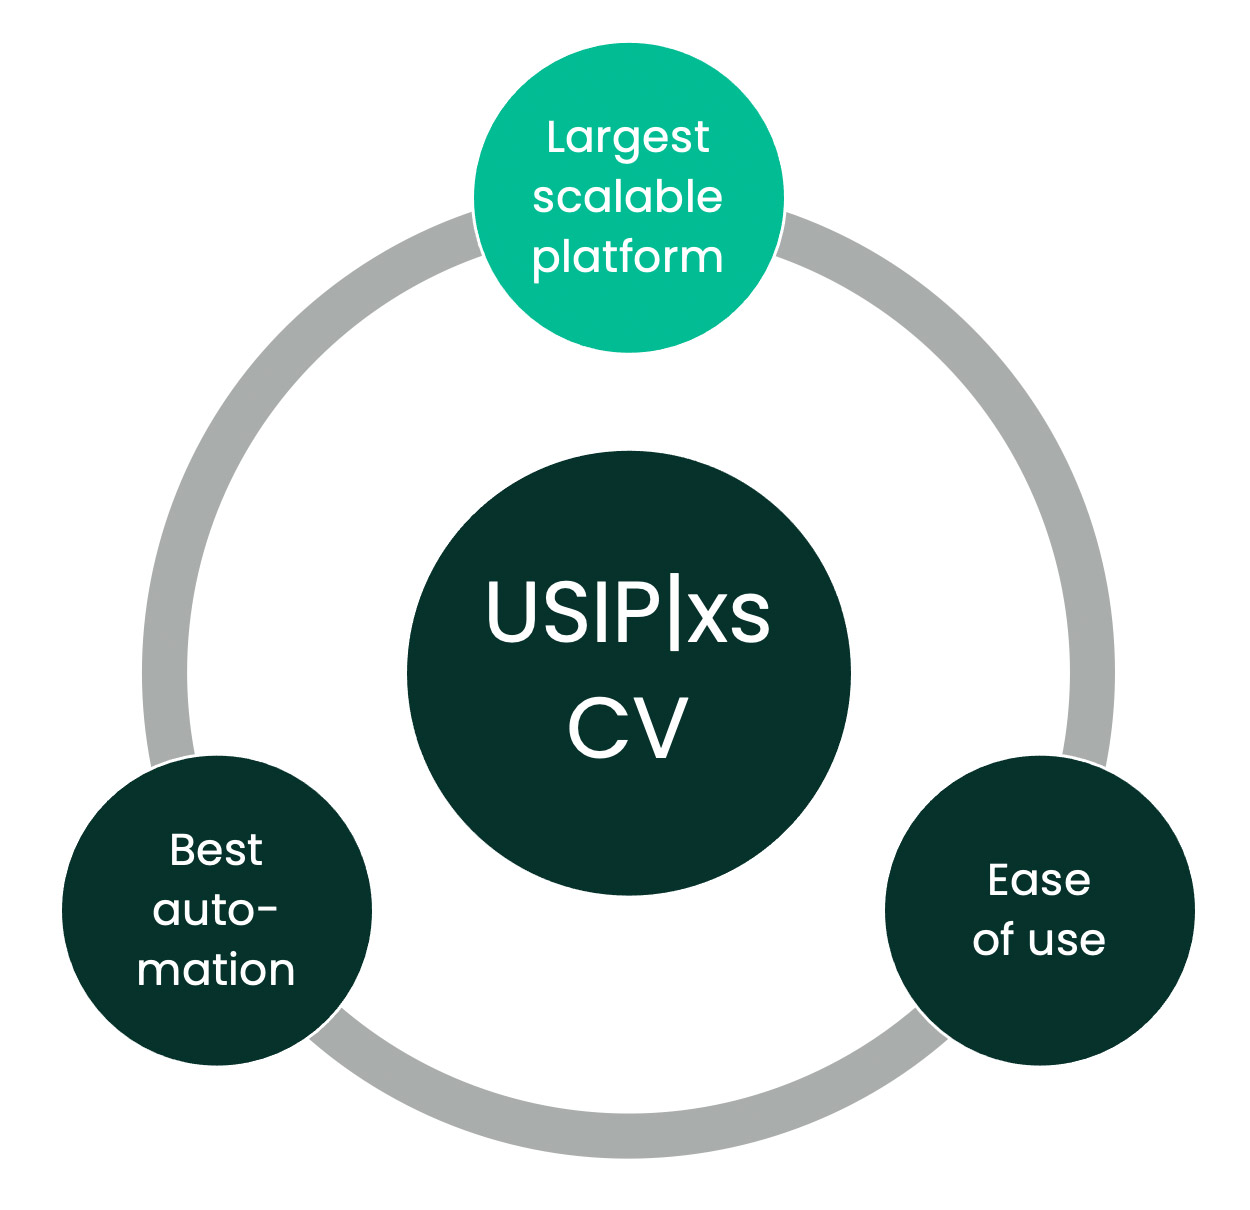 USIP|xs CV features creating synergies